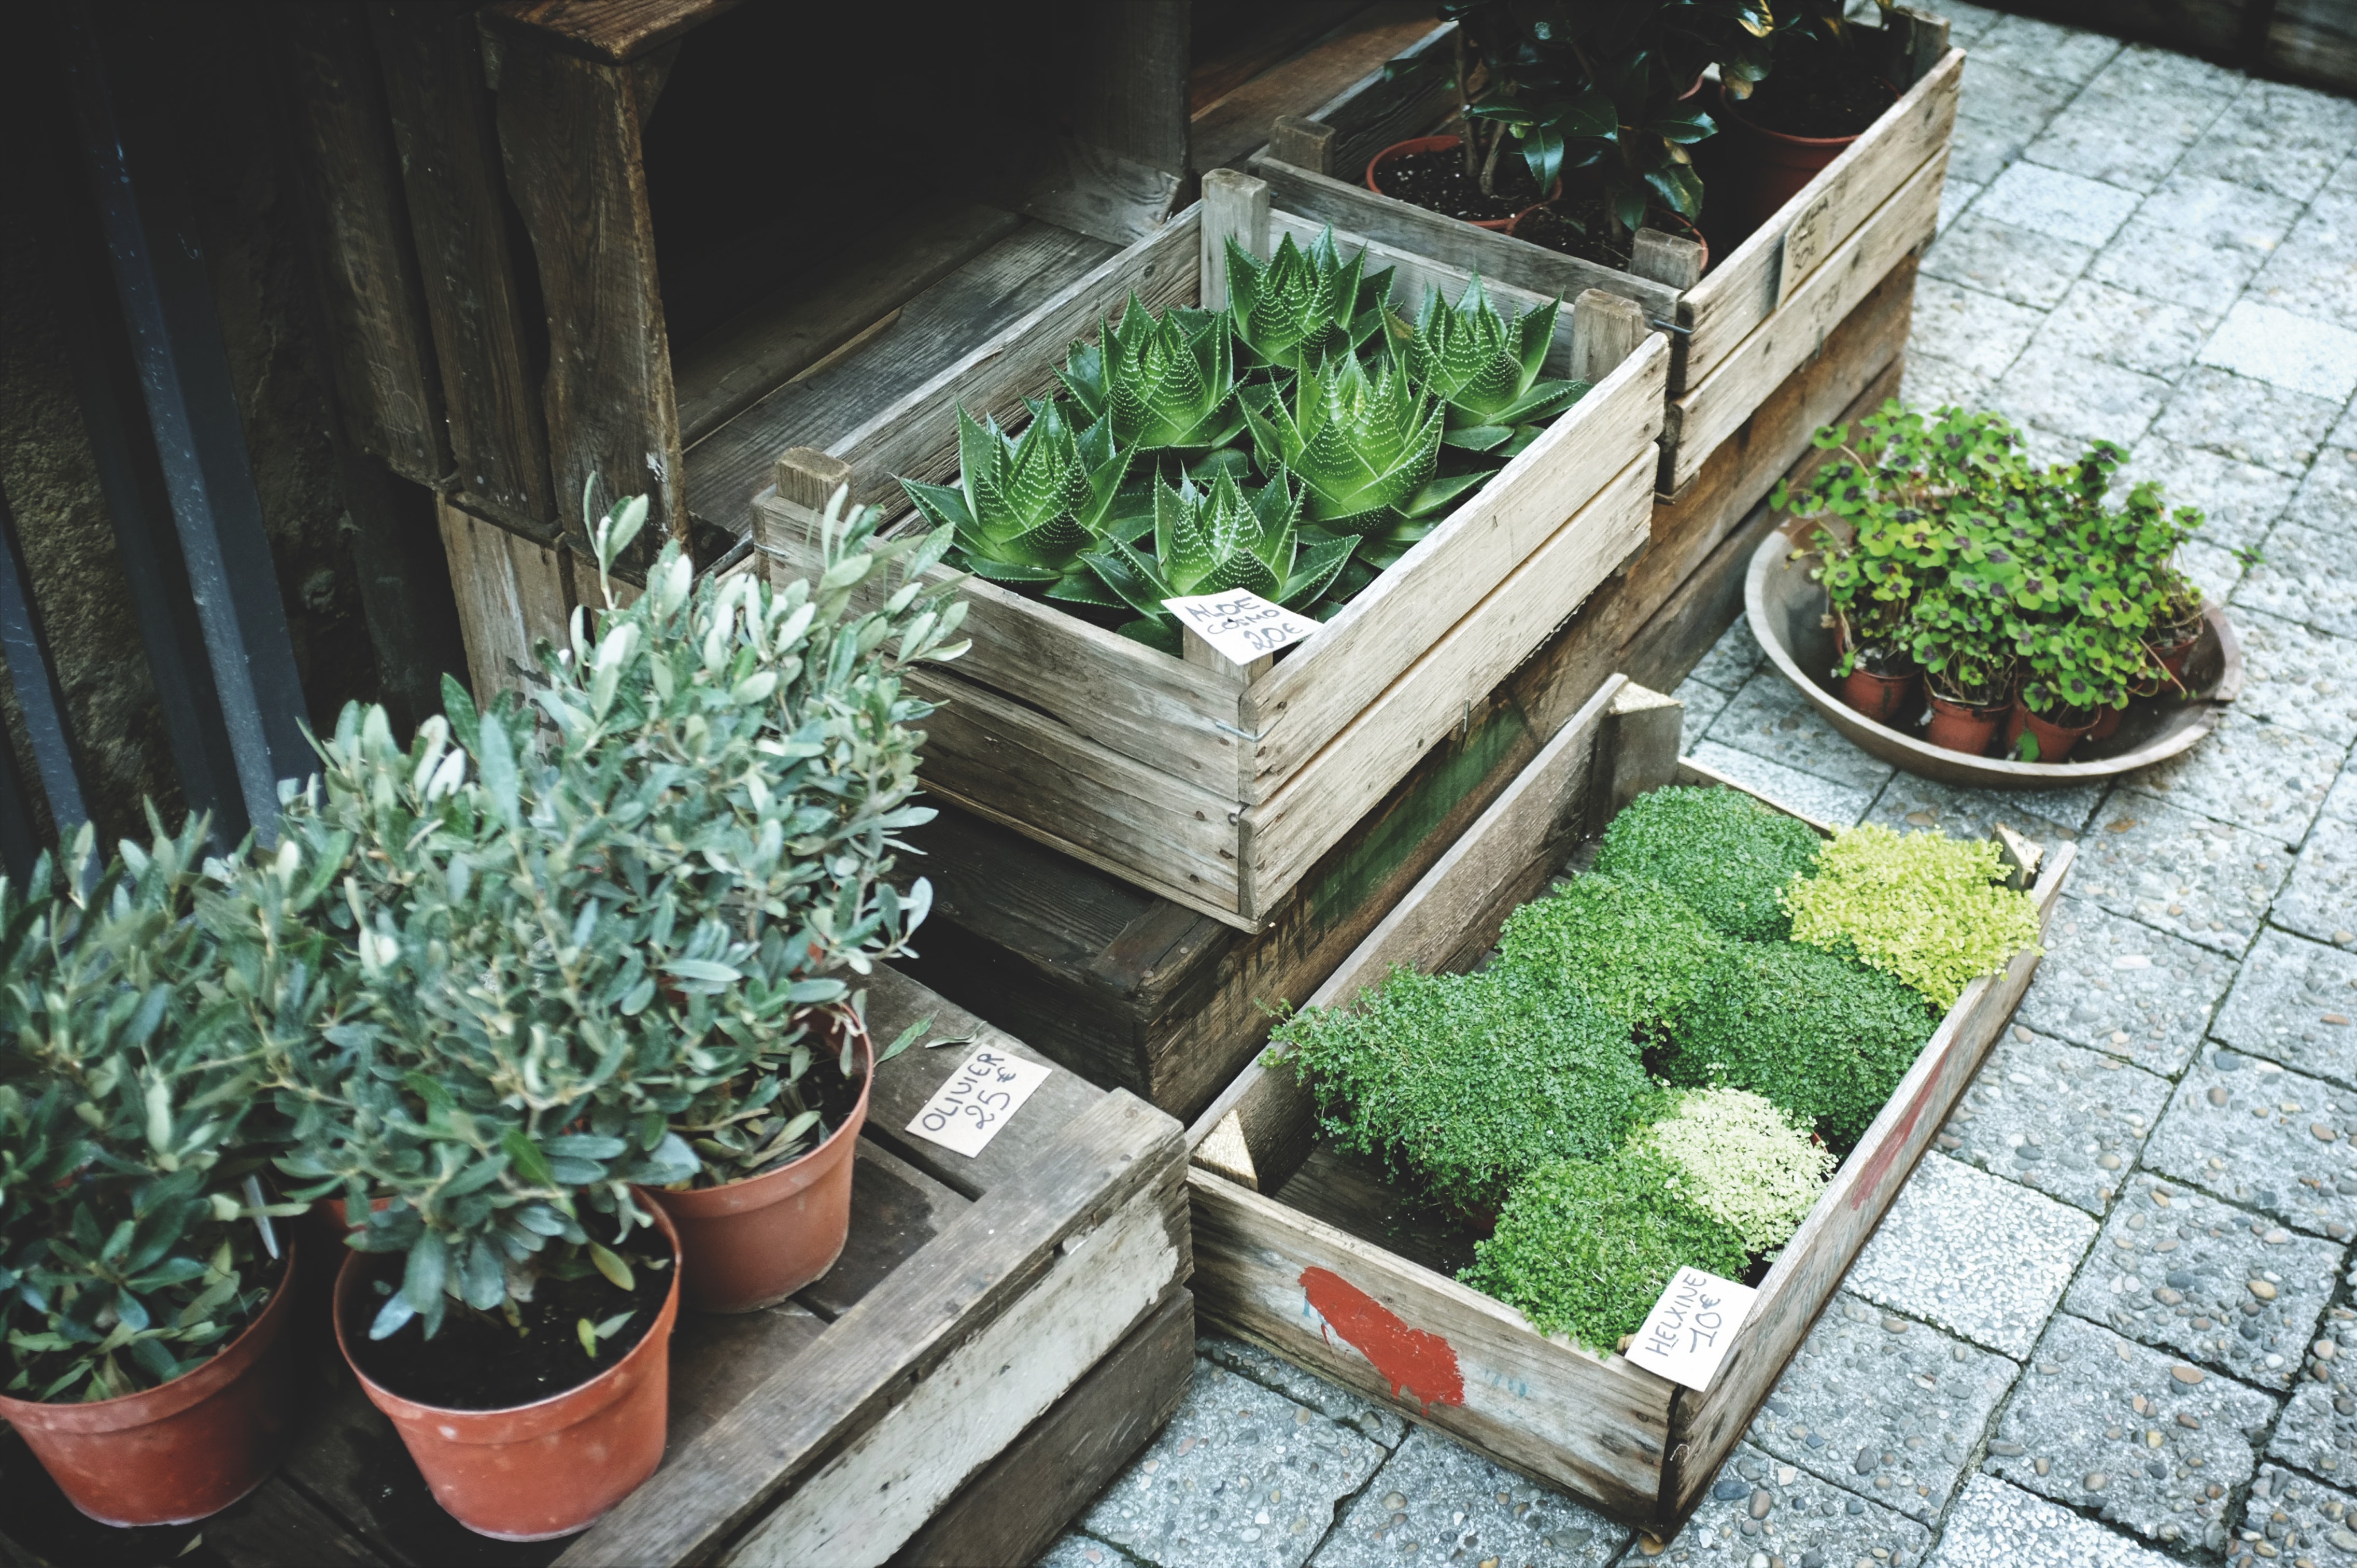 Stone paving with crates of green plants